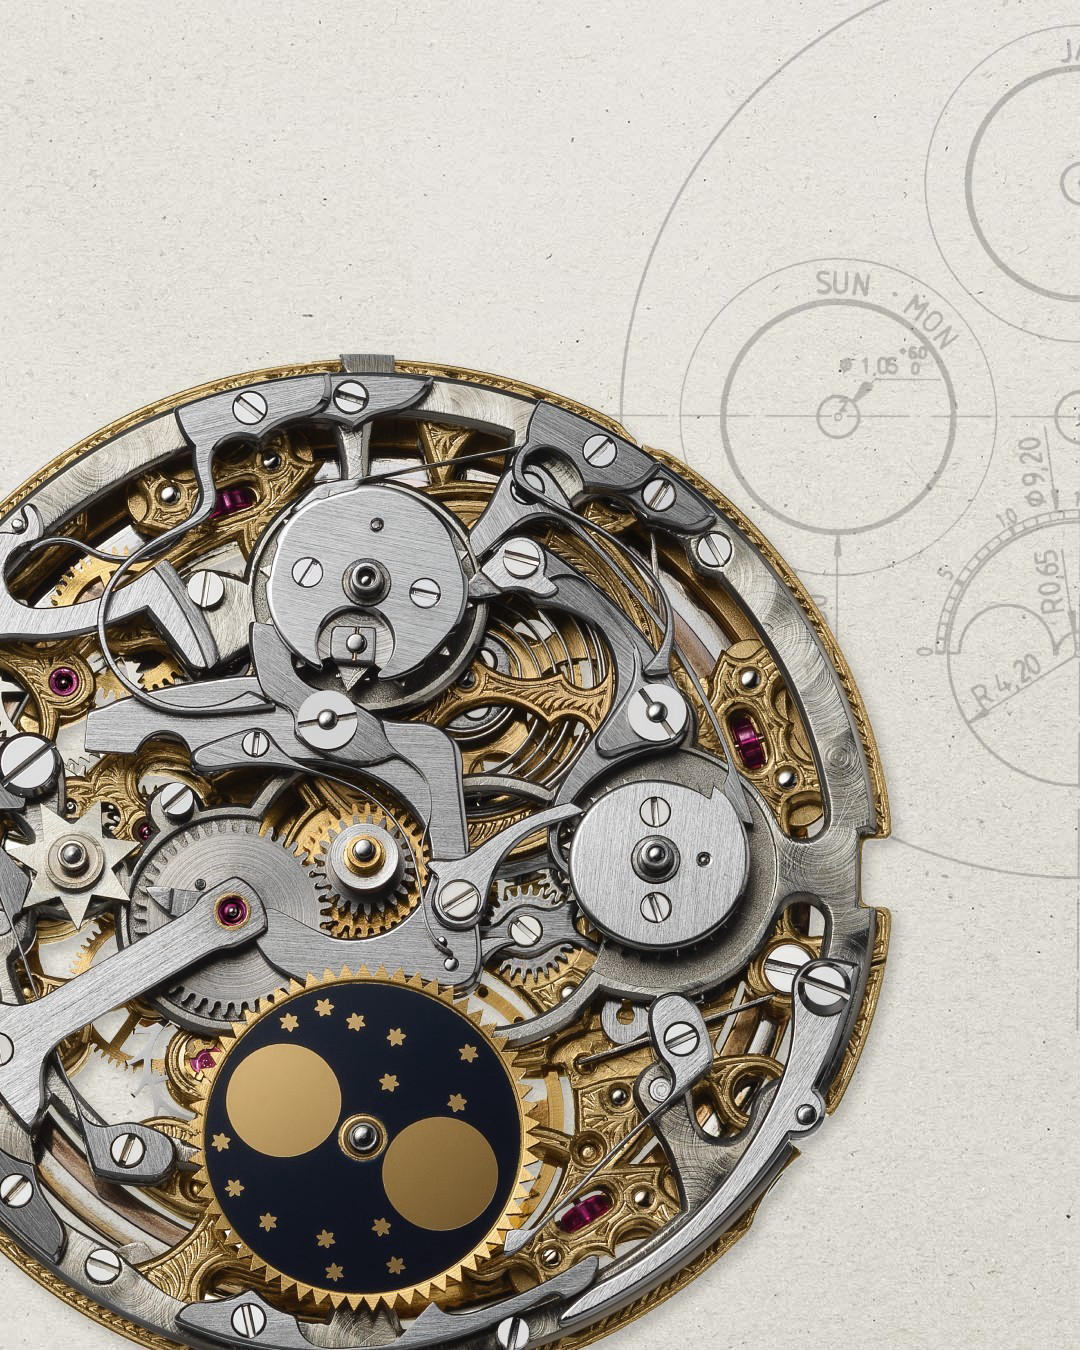 image  1 Audemars Piguet - Revealing the marvels of technique and decoration of complicated mechanisms to the